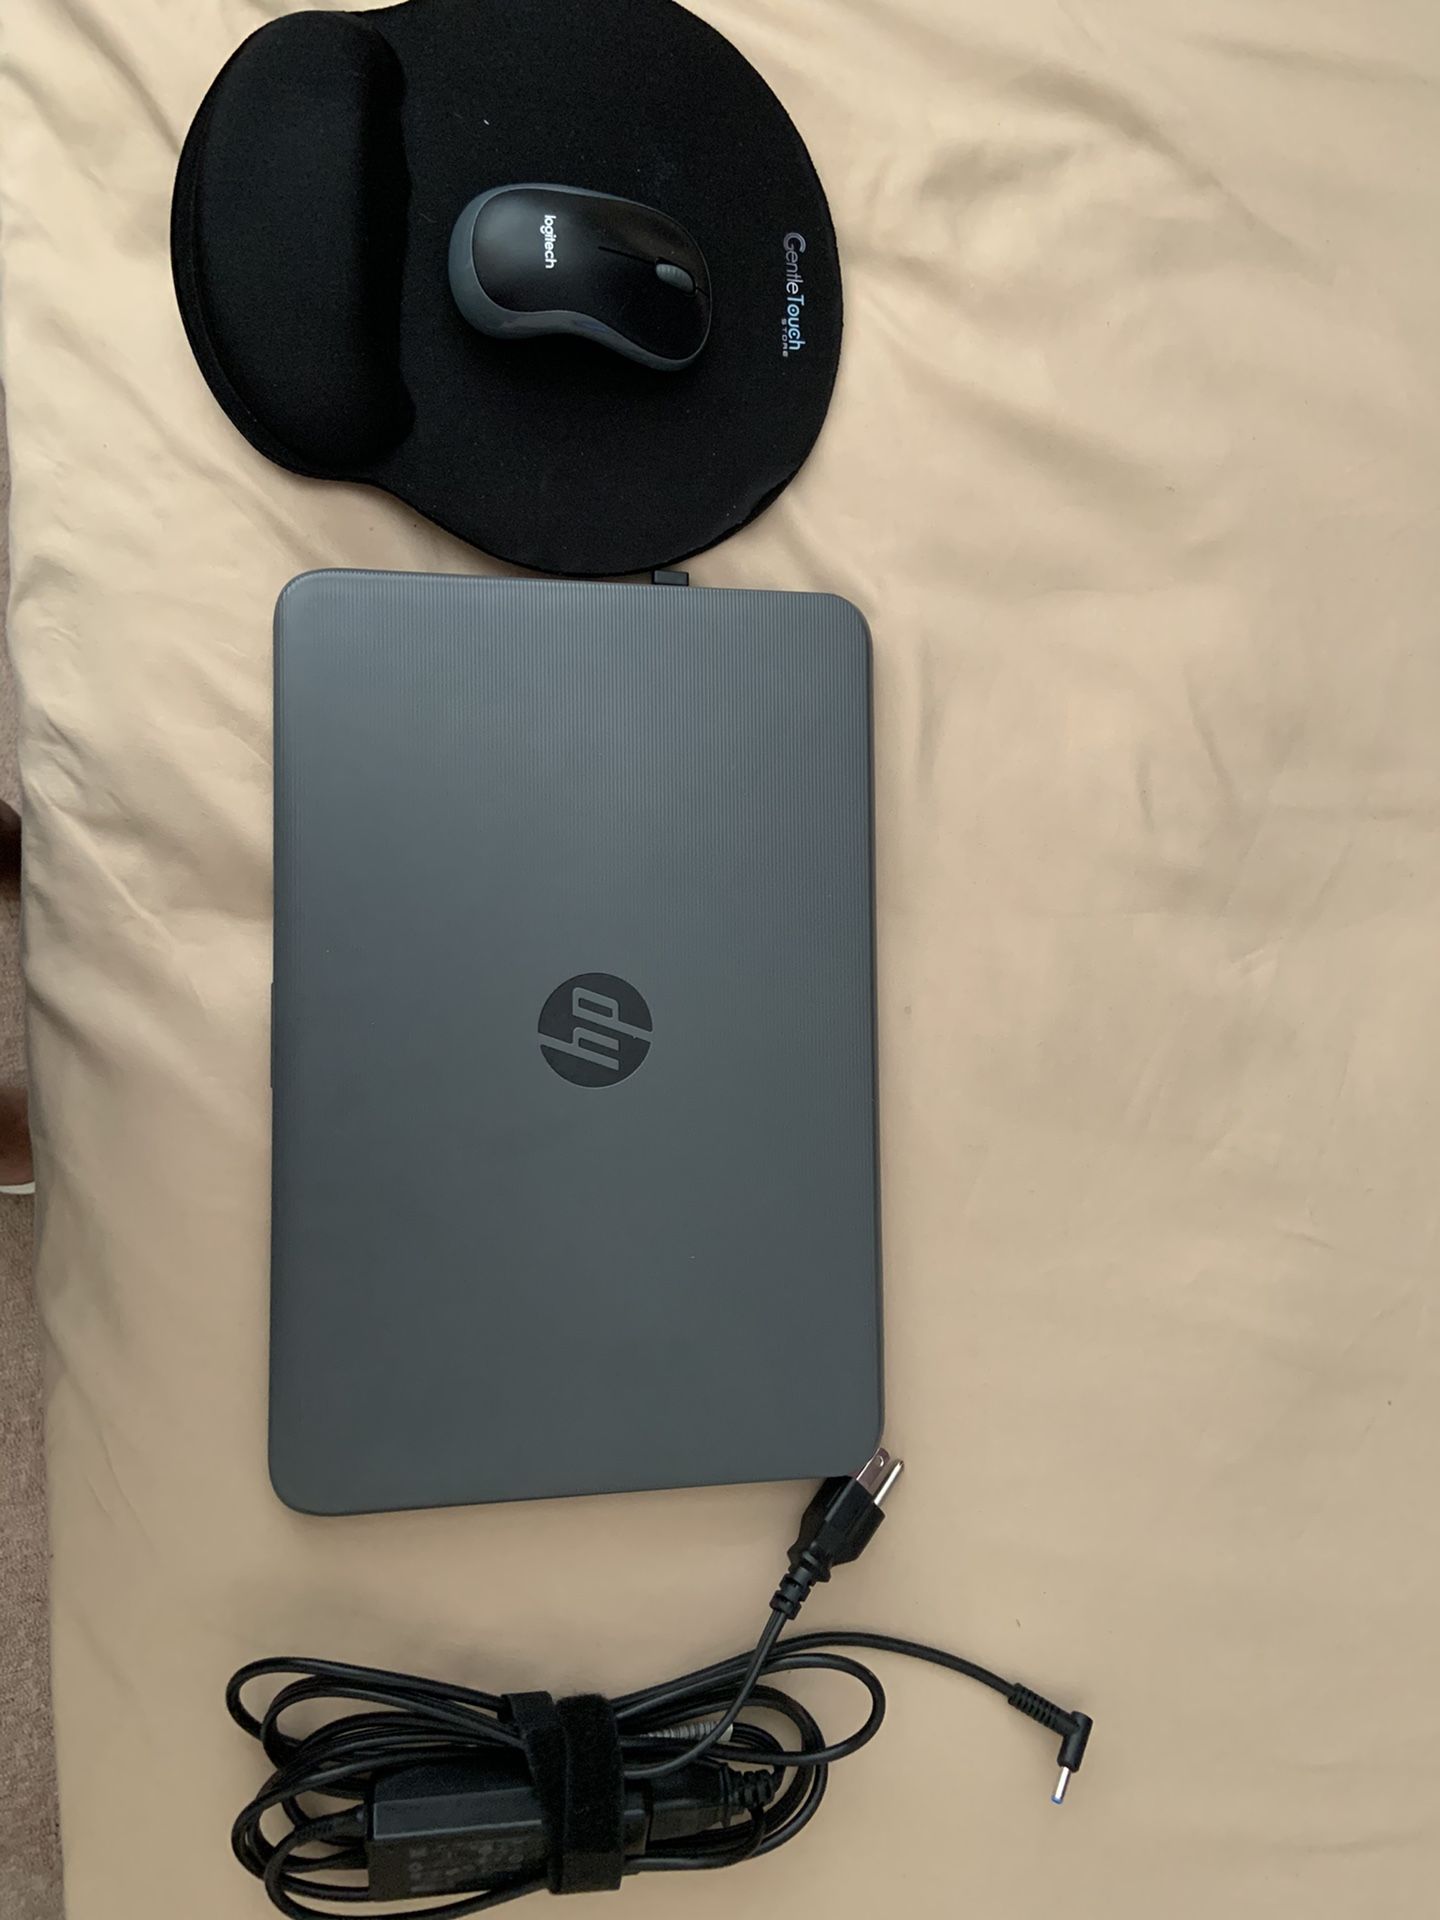 HP Stream Laptop, Charger and Mouse